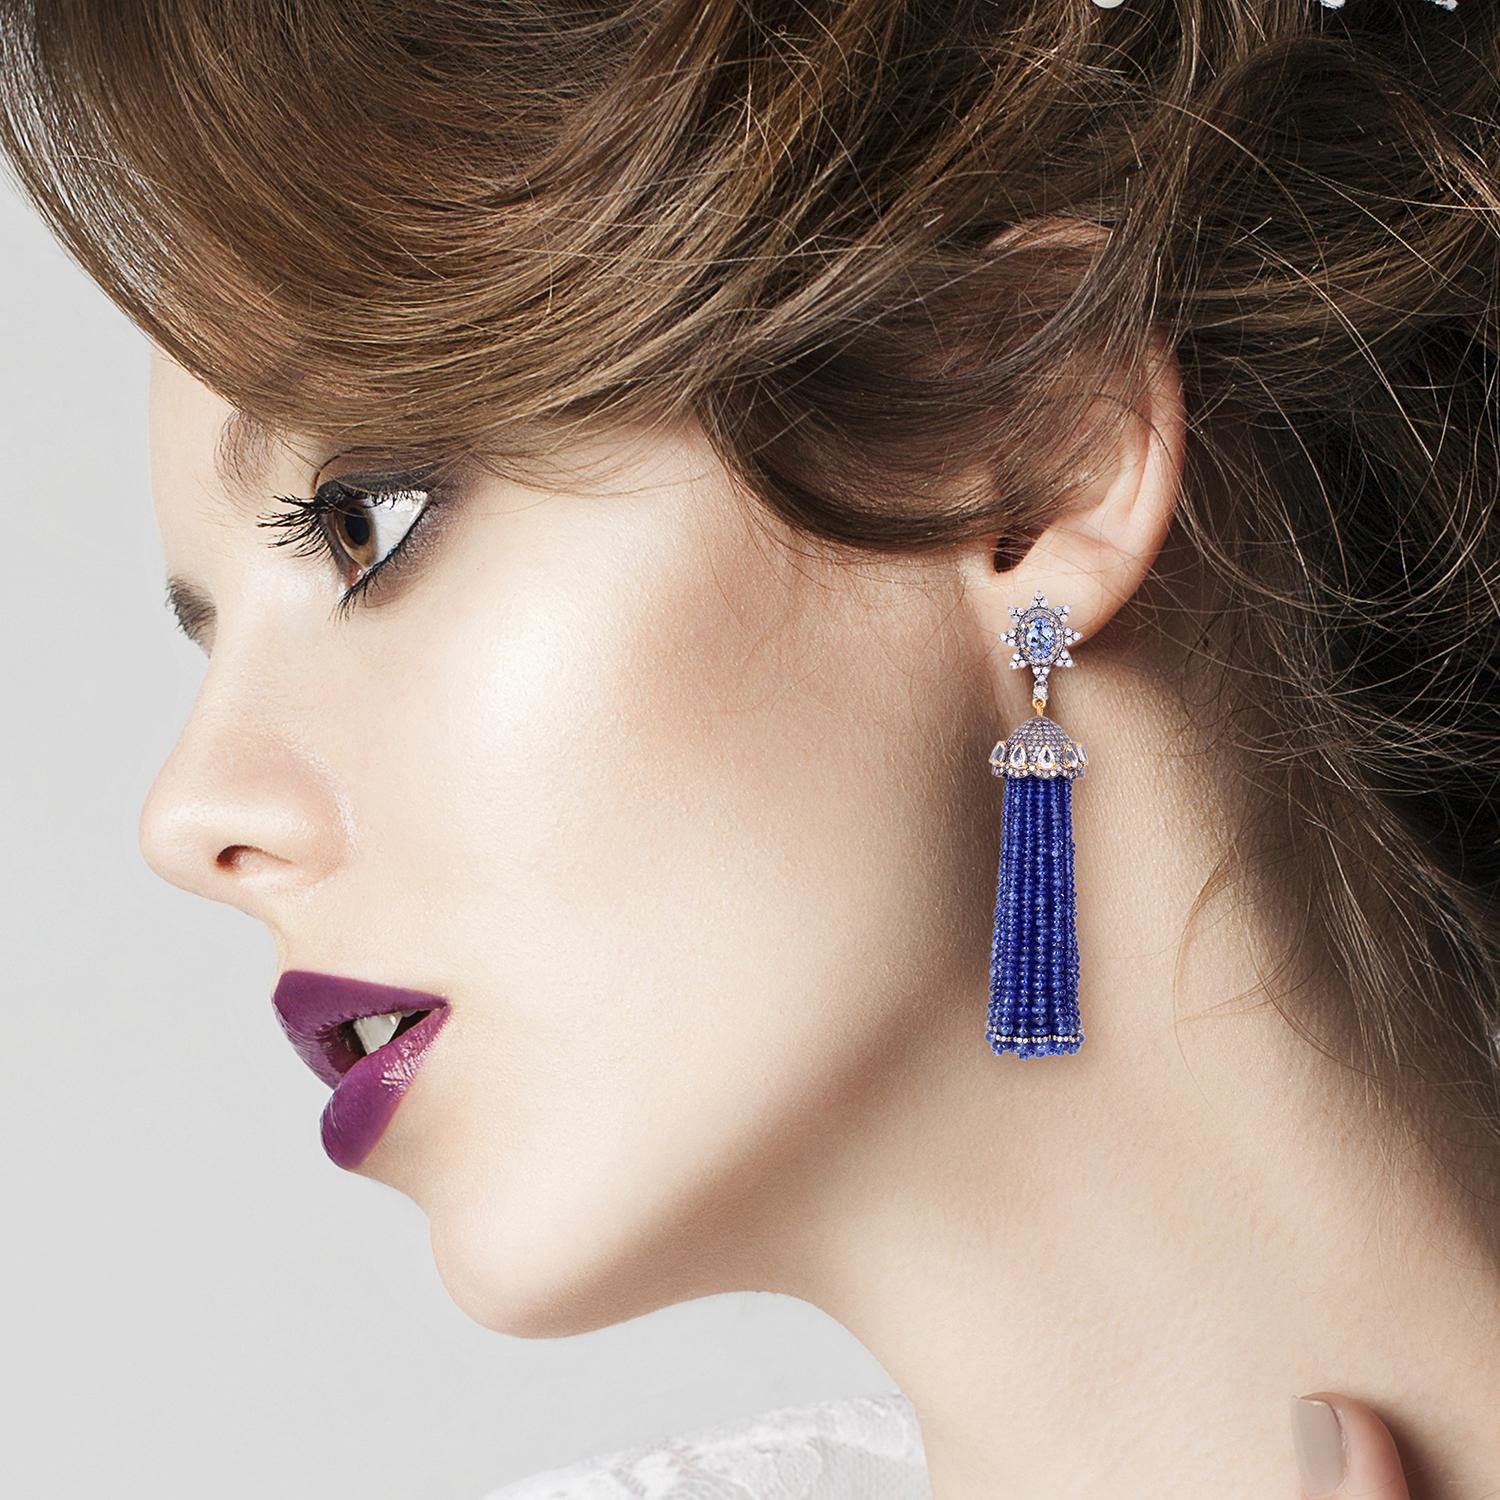 These stunning exceptional tassel earrings are handmade in 18-karat gold and sterling silver.  It is set with 157.8 carats sapphire, 2.0 carats tanzanite and 4.835 carats of glittering diamonds. 

FOLLOW  MEGHNA JEWELS storefront to view the latest